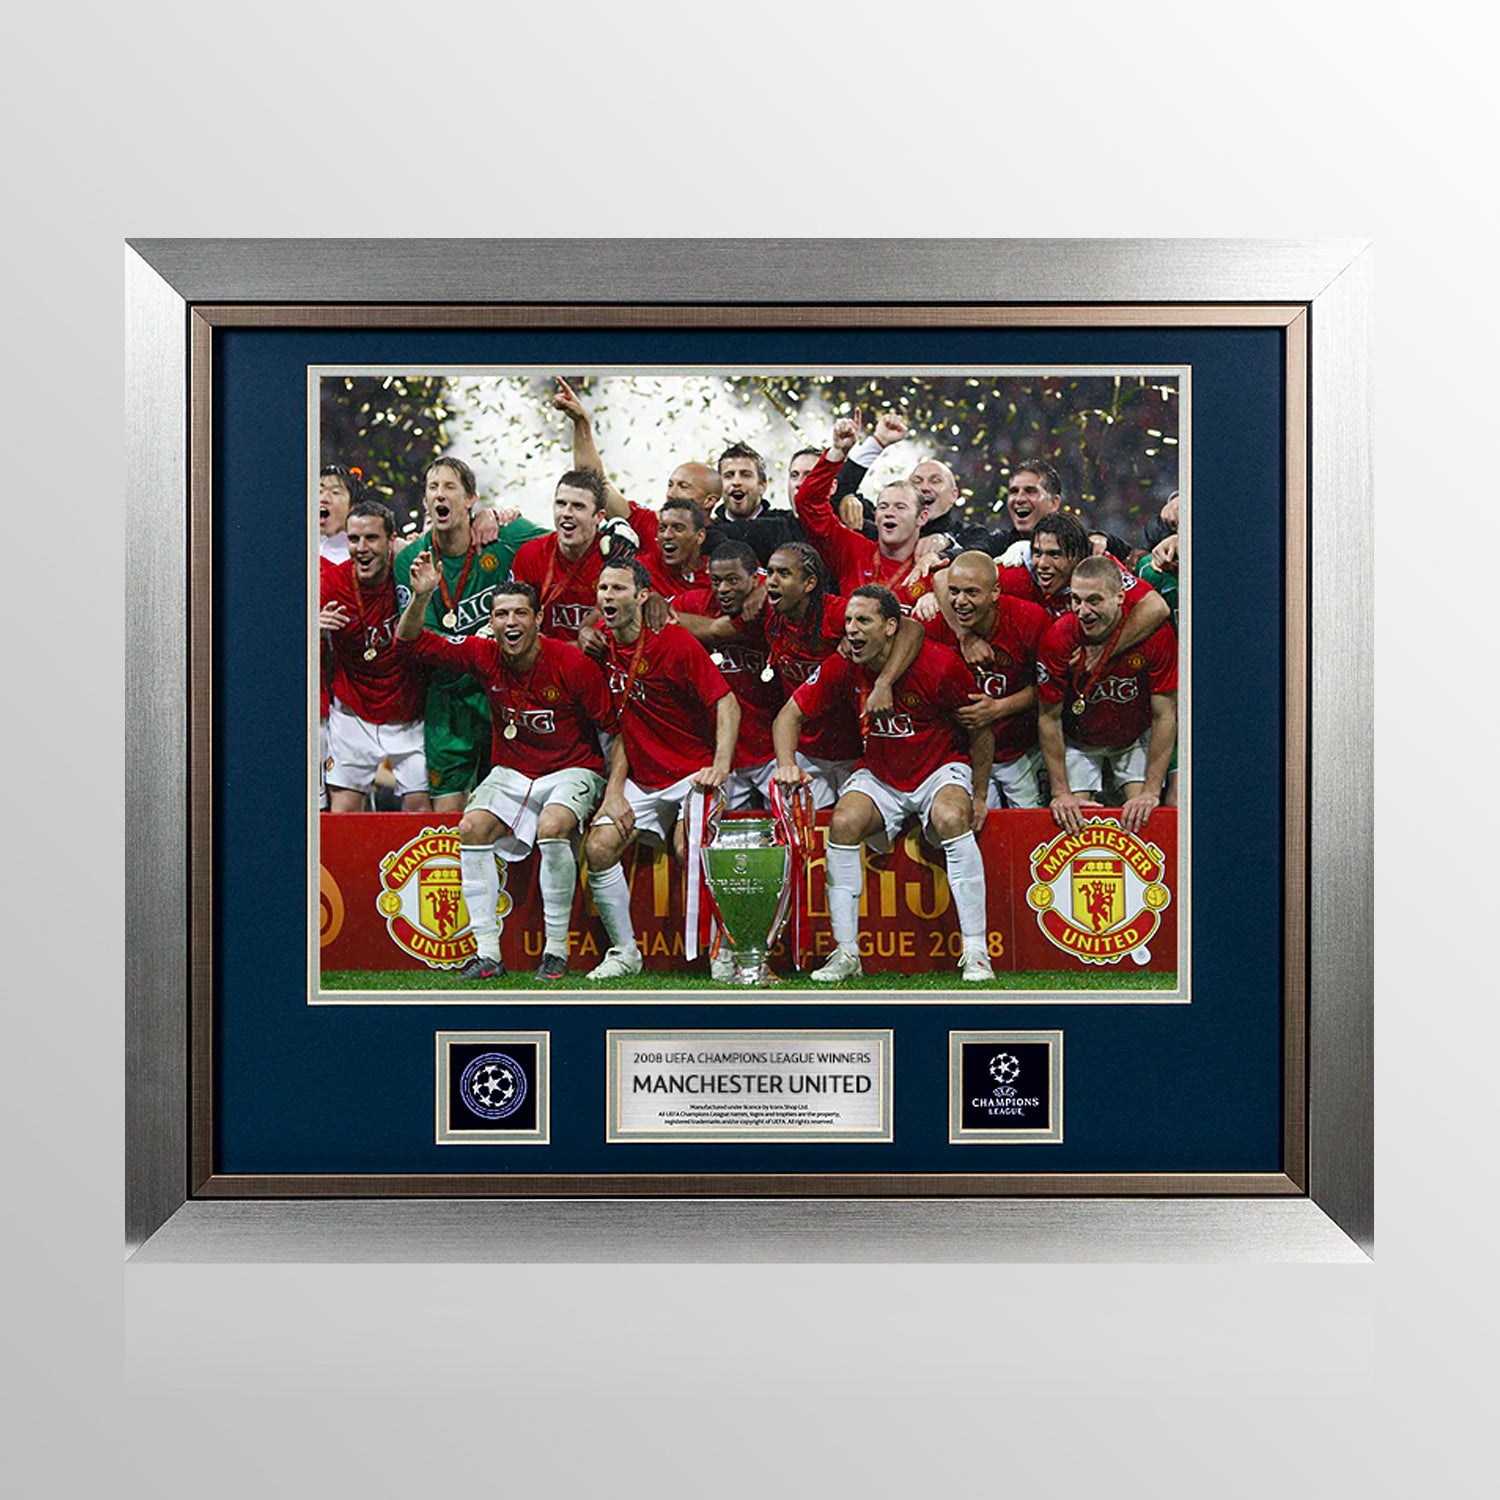 UNSIGNED AC Milan Official UEFA Champions League Framed Photo 